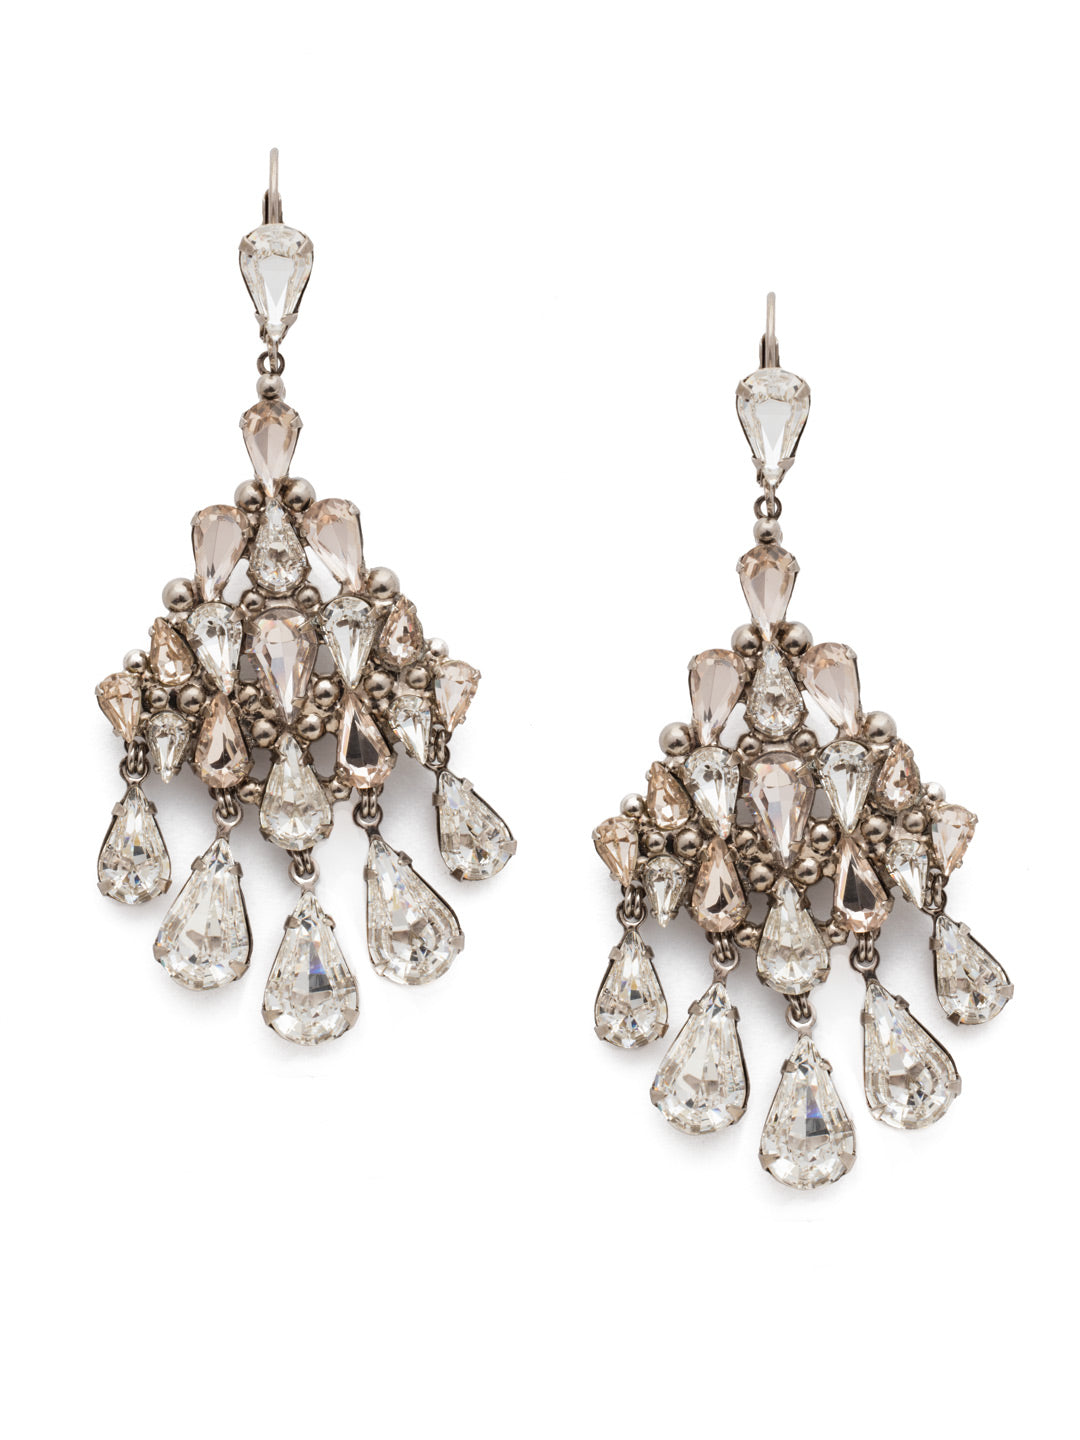 Bonita Statement Earring - ECK46ASPLS - The Bonita Statement Earrings are an iconic chandelier earring on a french wire drop, featuring sparkling briolette crystals cascading down in a pattern that is sure to catch the attention of anyone looking. From Sorrelli's Soft Petal collection in our Antique Silver-tone finish.